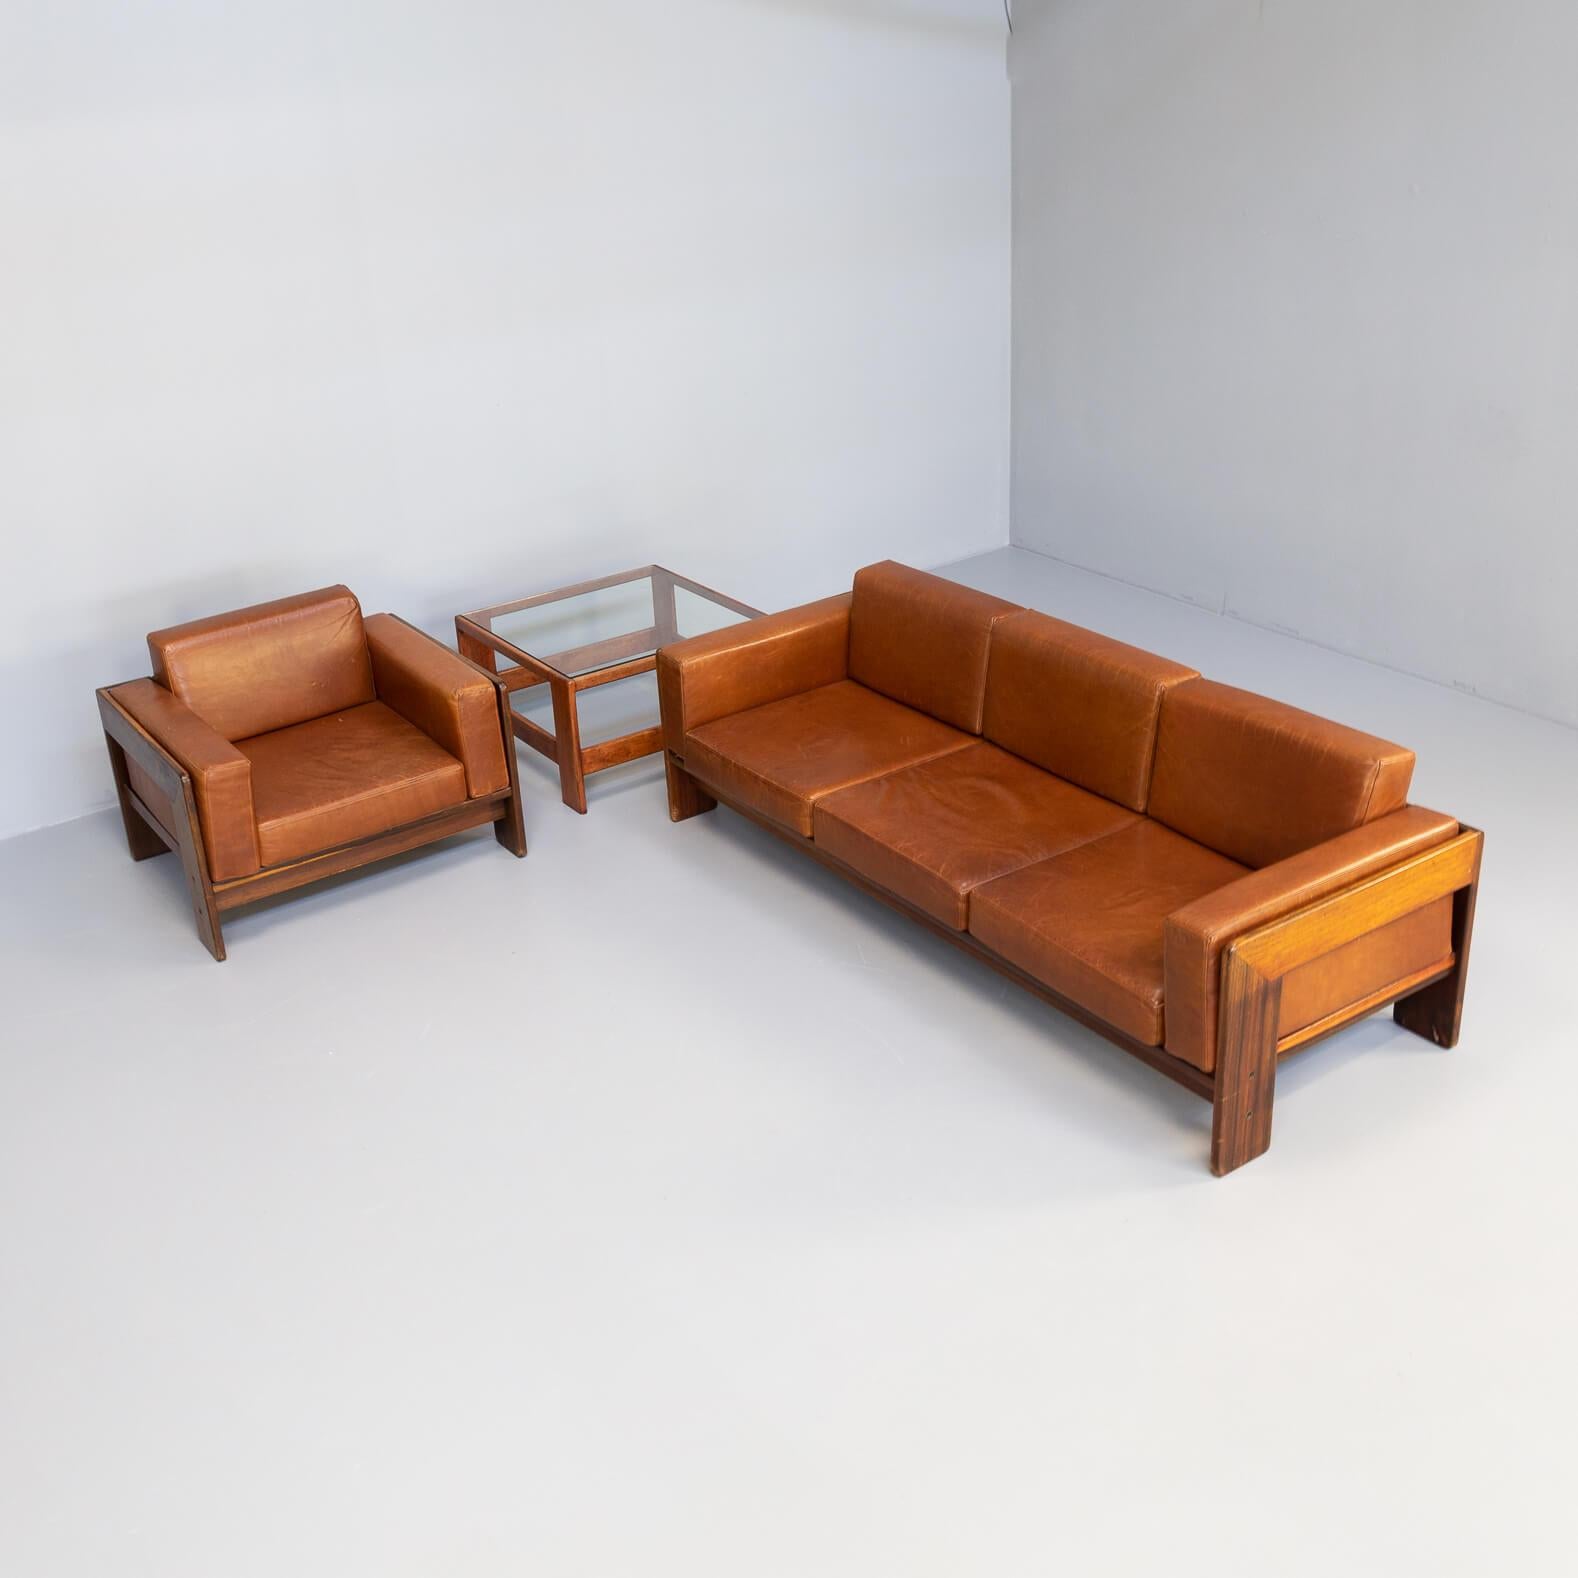 60s Tobia Scarpa ‘Bastiano’ Sofa, Fauteuil & Sidetable Set for Knoll In Good Condition For Sale In Amstelveen, Noord